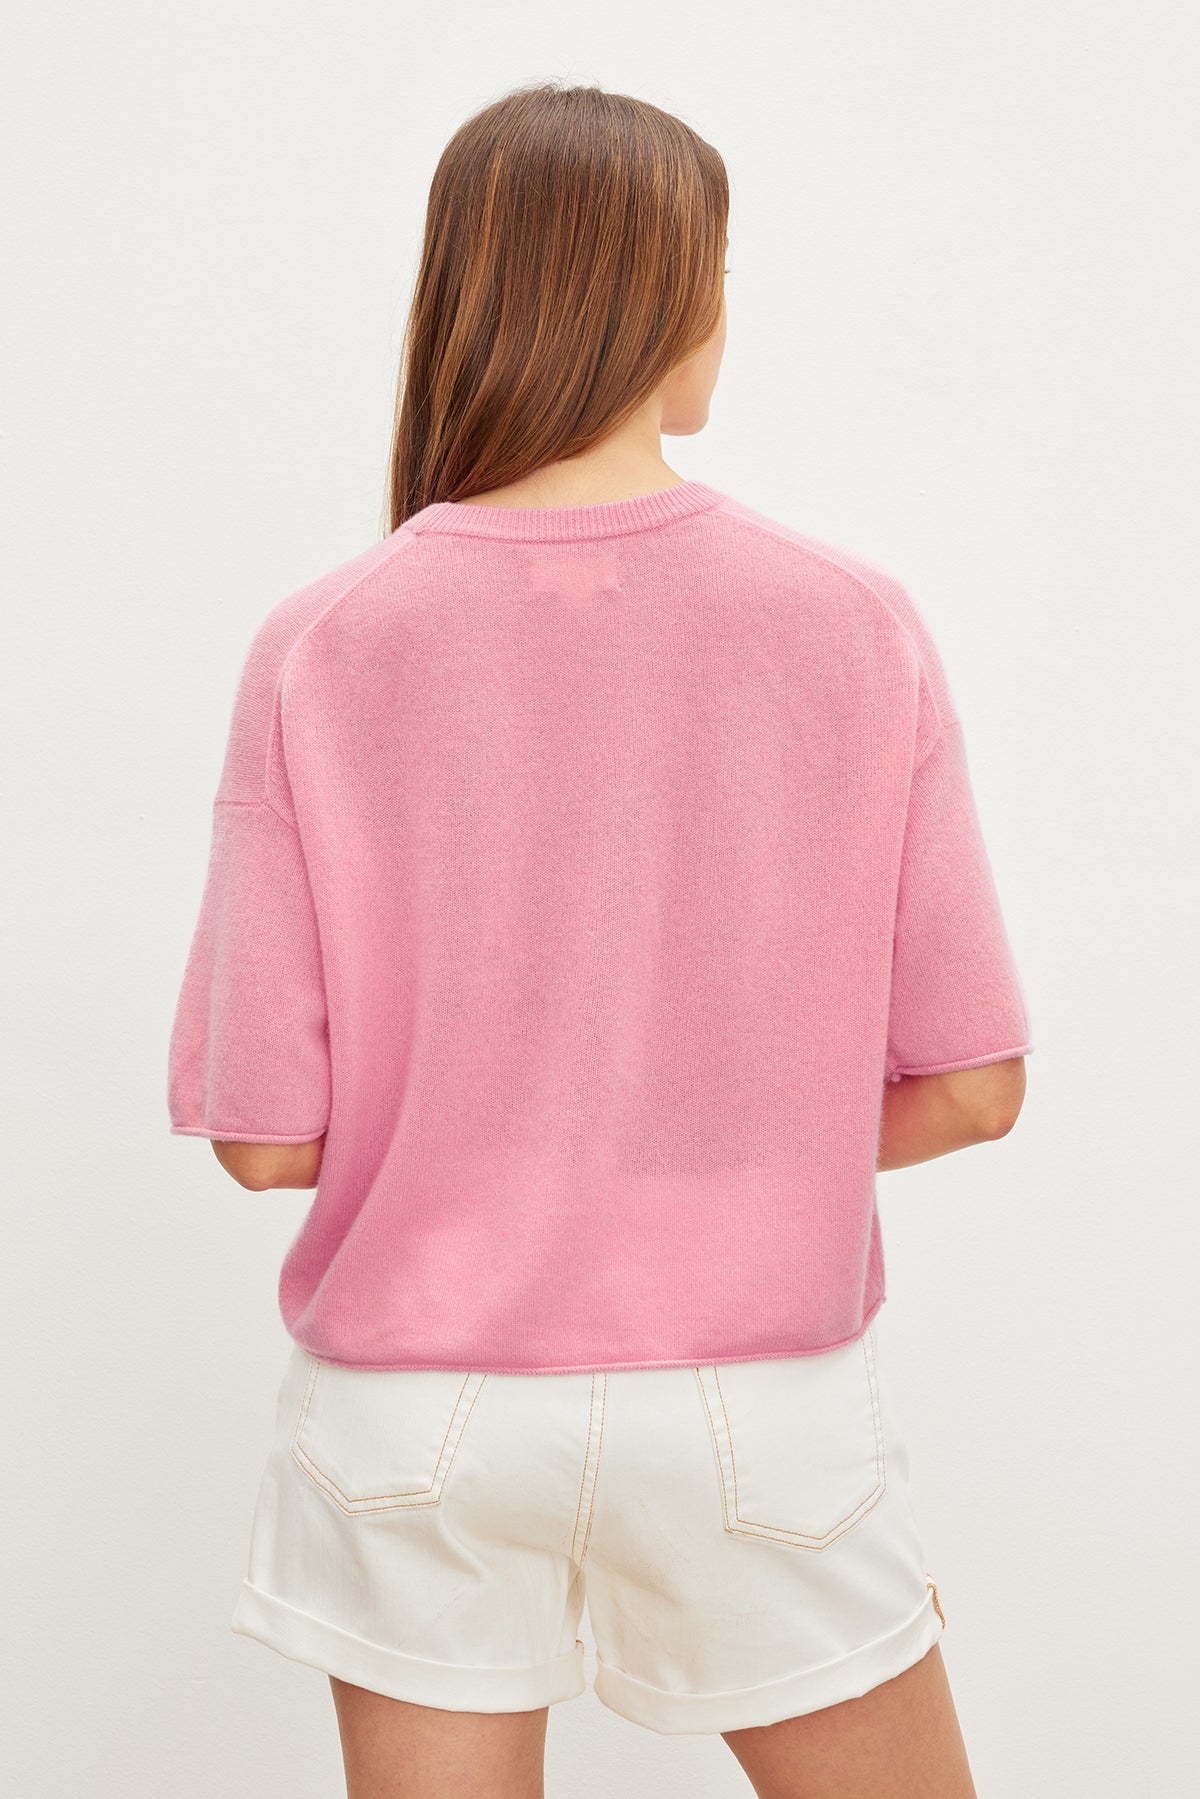   The back view of a woman wearing a Velvet by Graham & Spencer BLAKE CASHMERE CREW NECK SWEATER and white shorts with a versatile and cropped silhouette. 